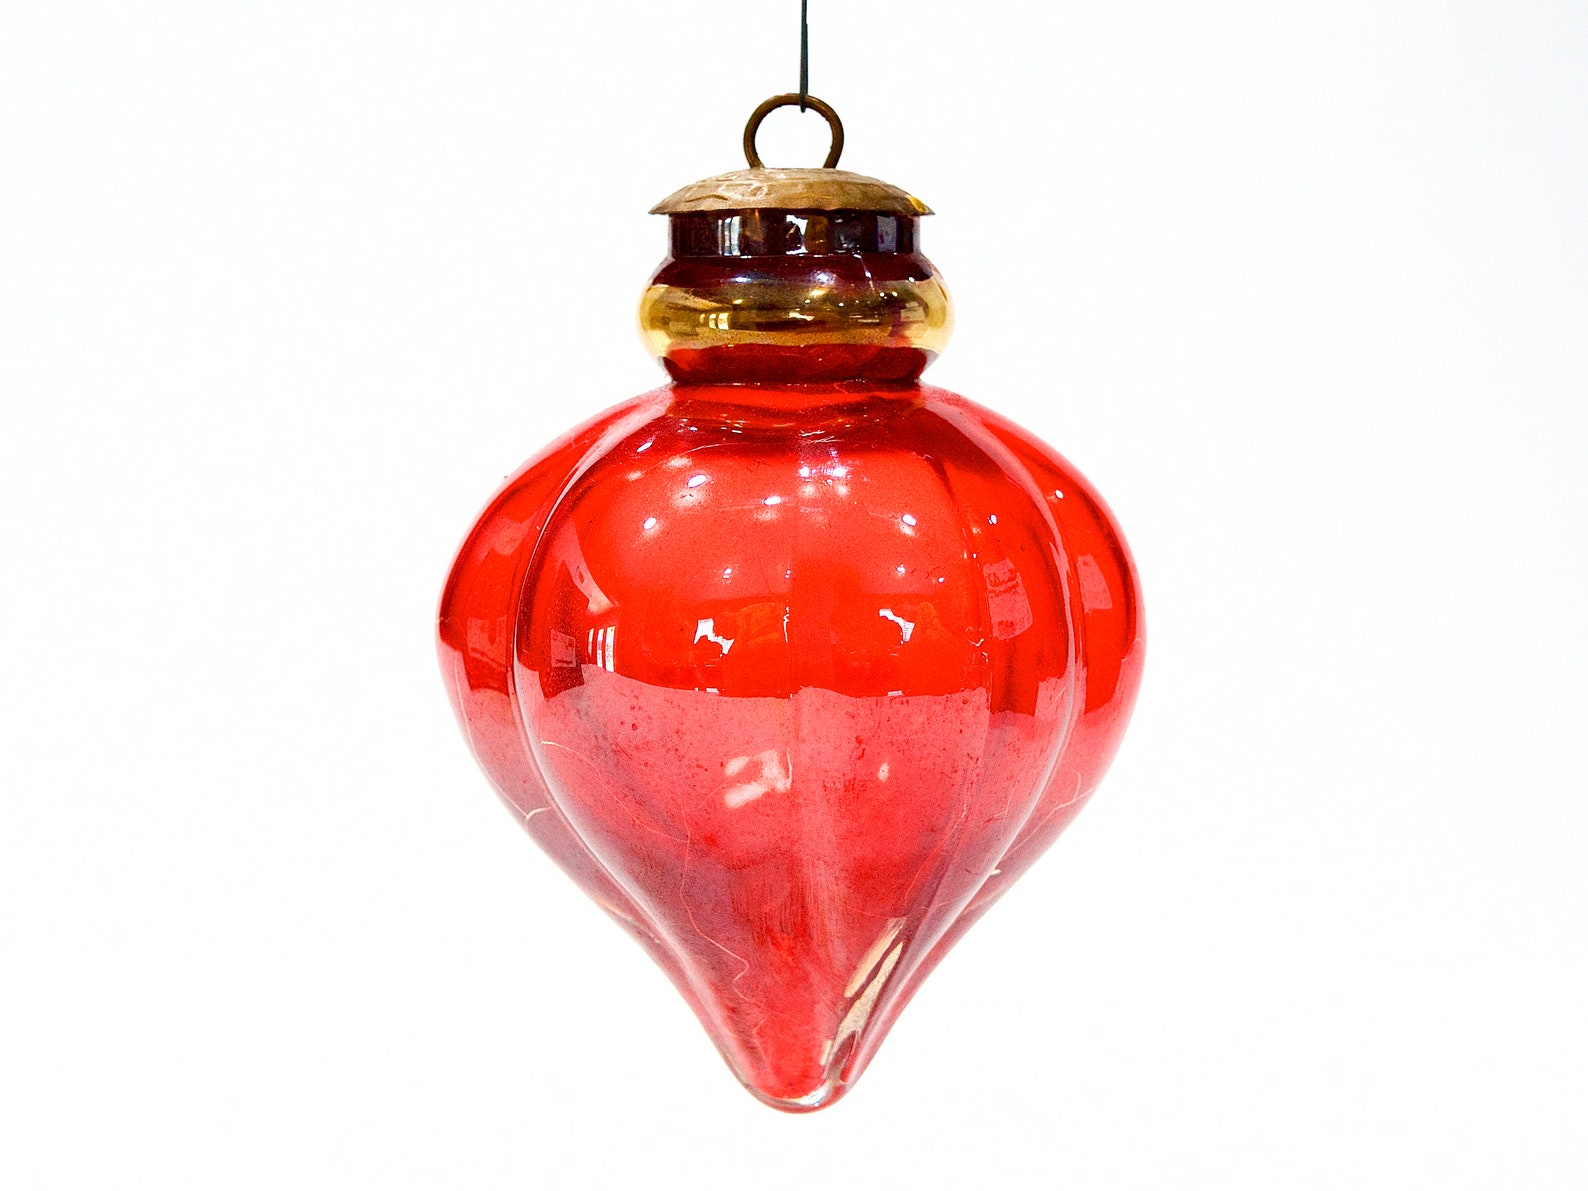 VINTAGE: LARGE Midwest Kugel Thick Glass Ornaments Glass image 0.